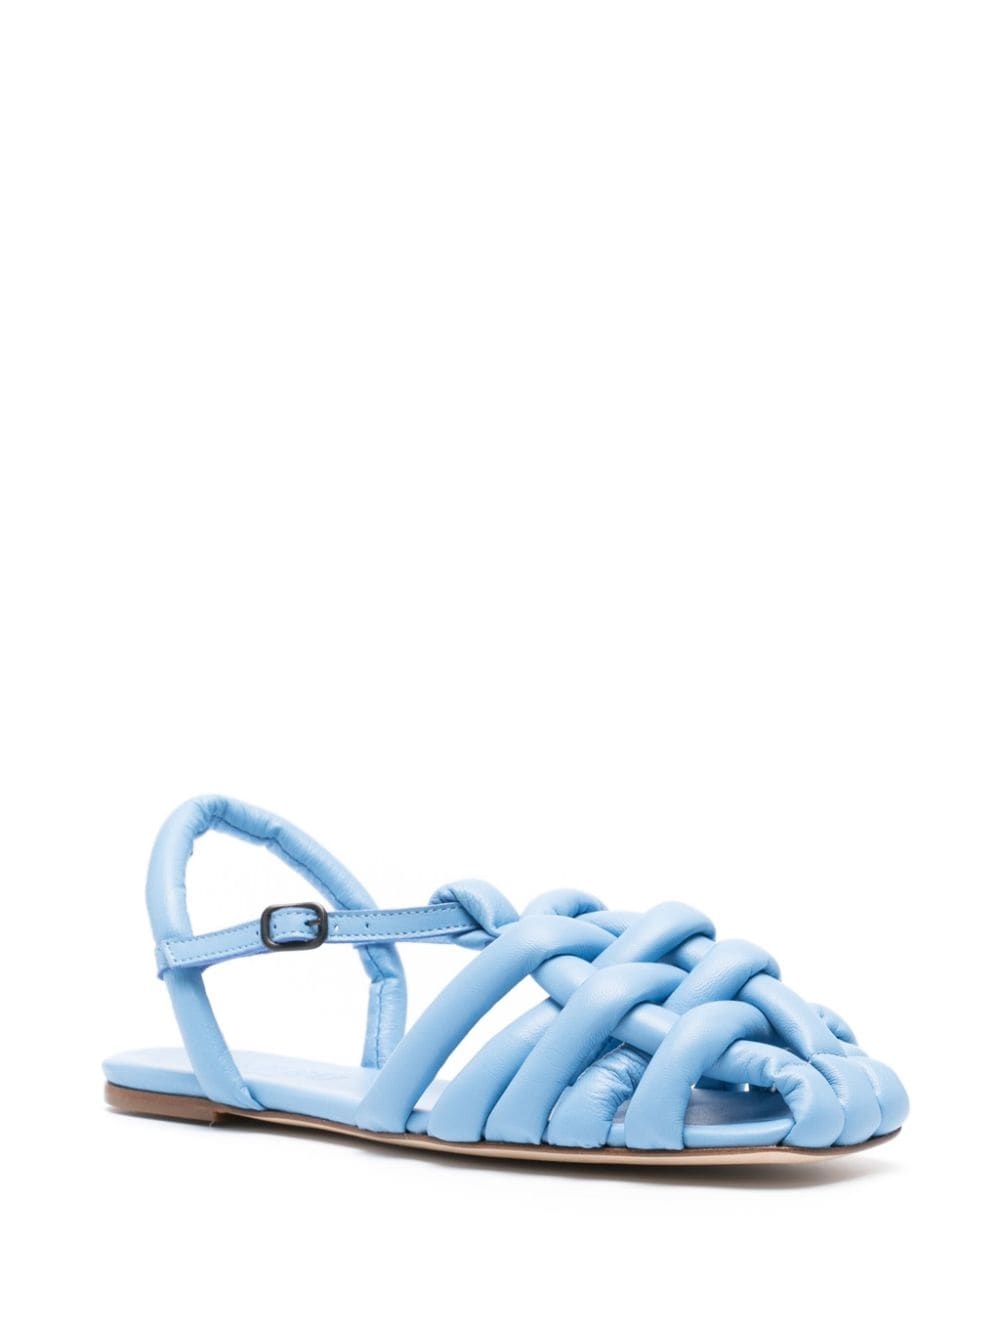 Cabersa padded leather sandals - 2